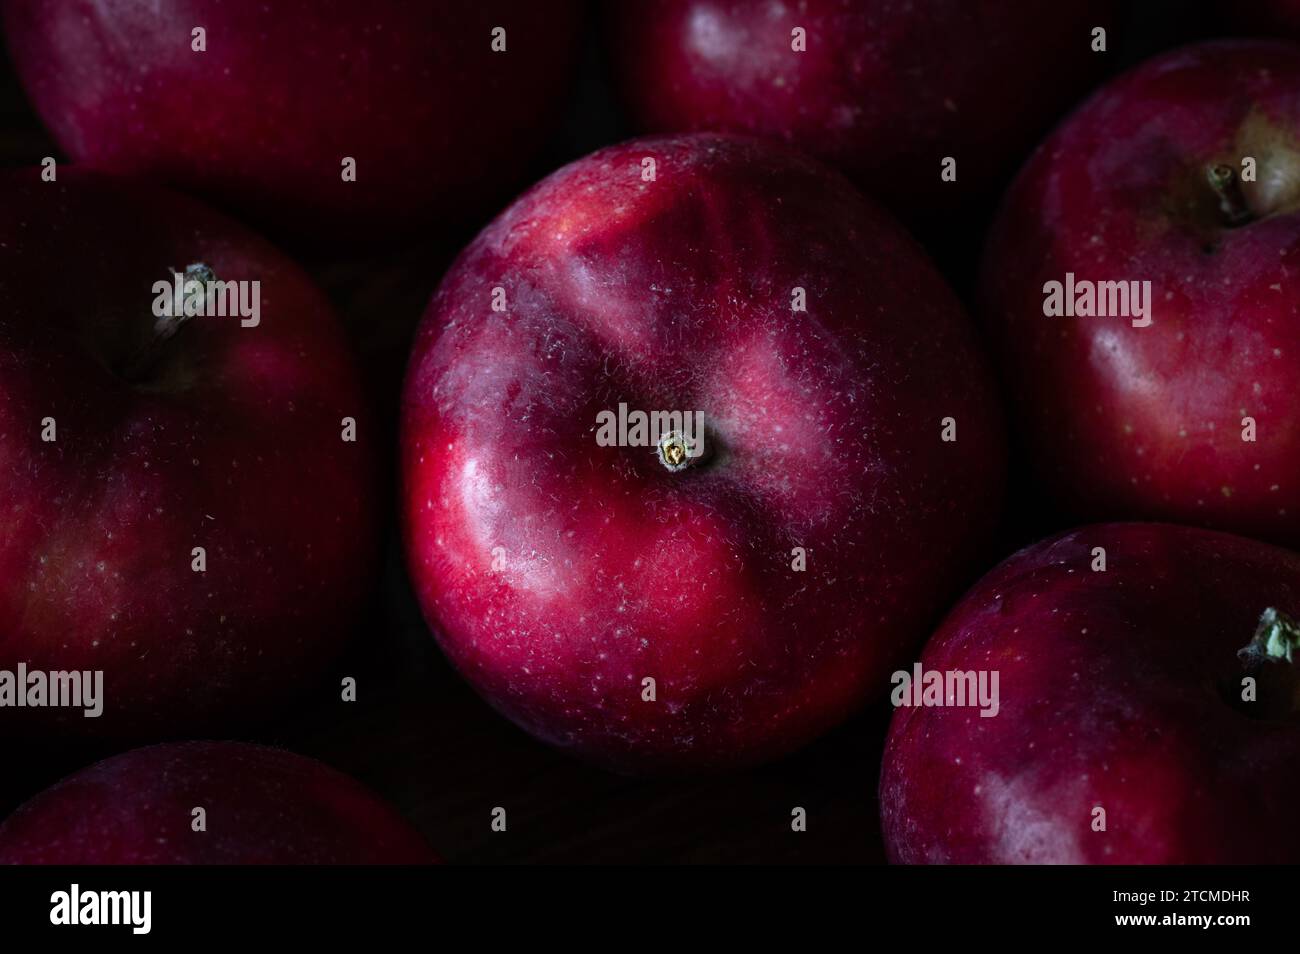 Top view of a red apple surrounded by other apples Stock Photo